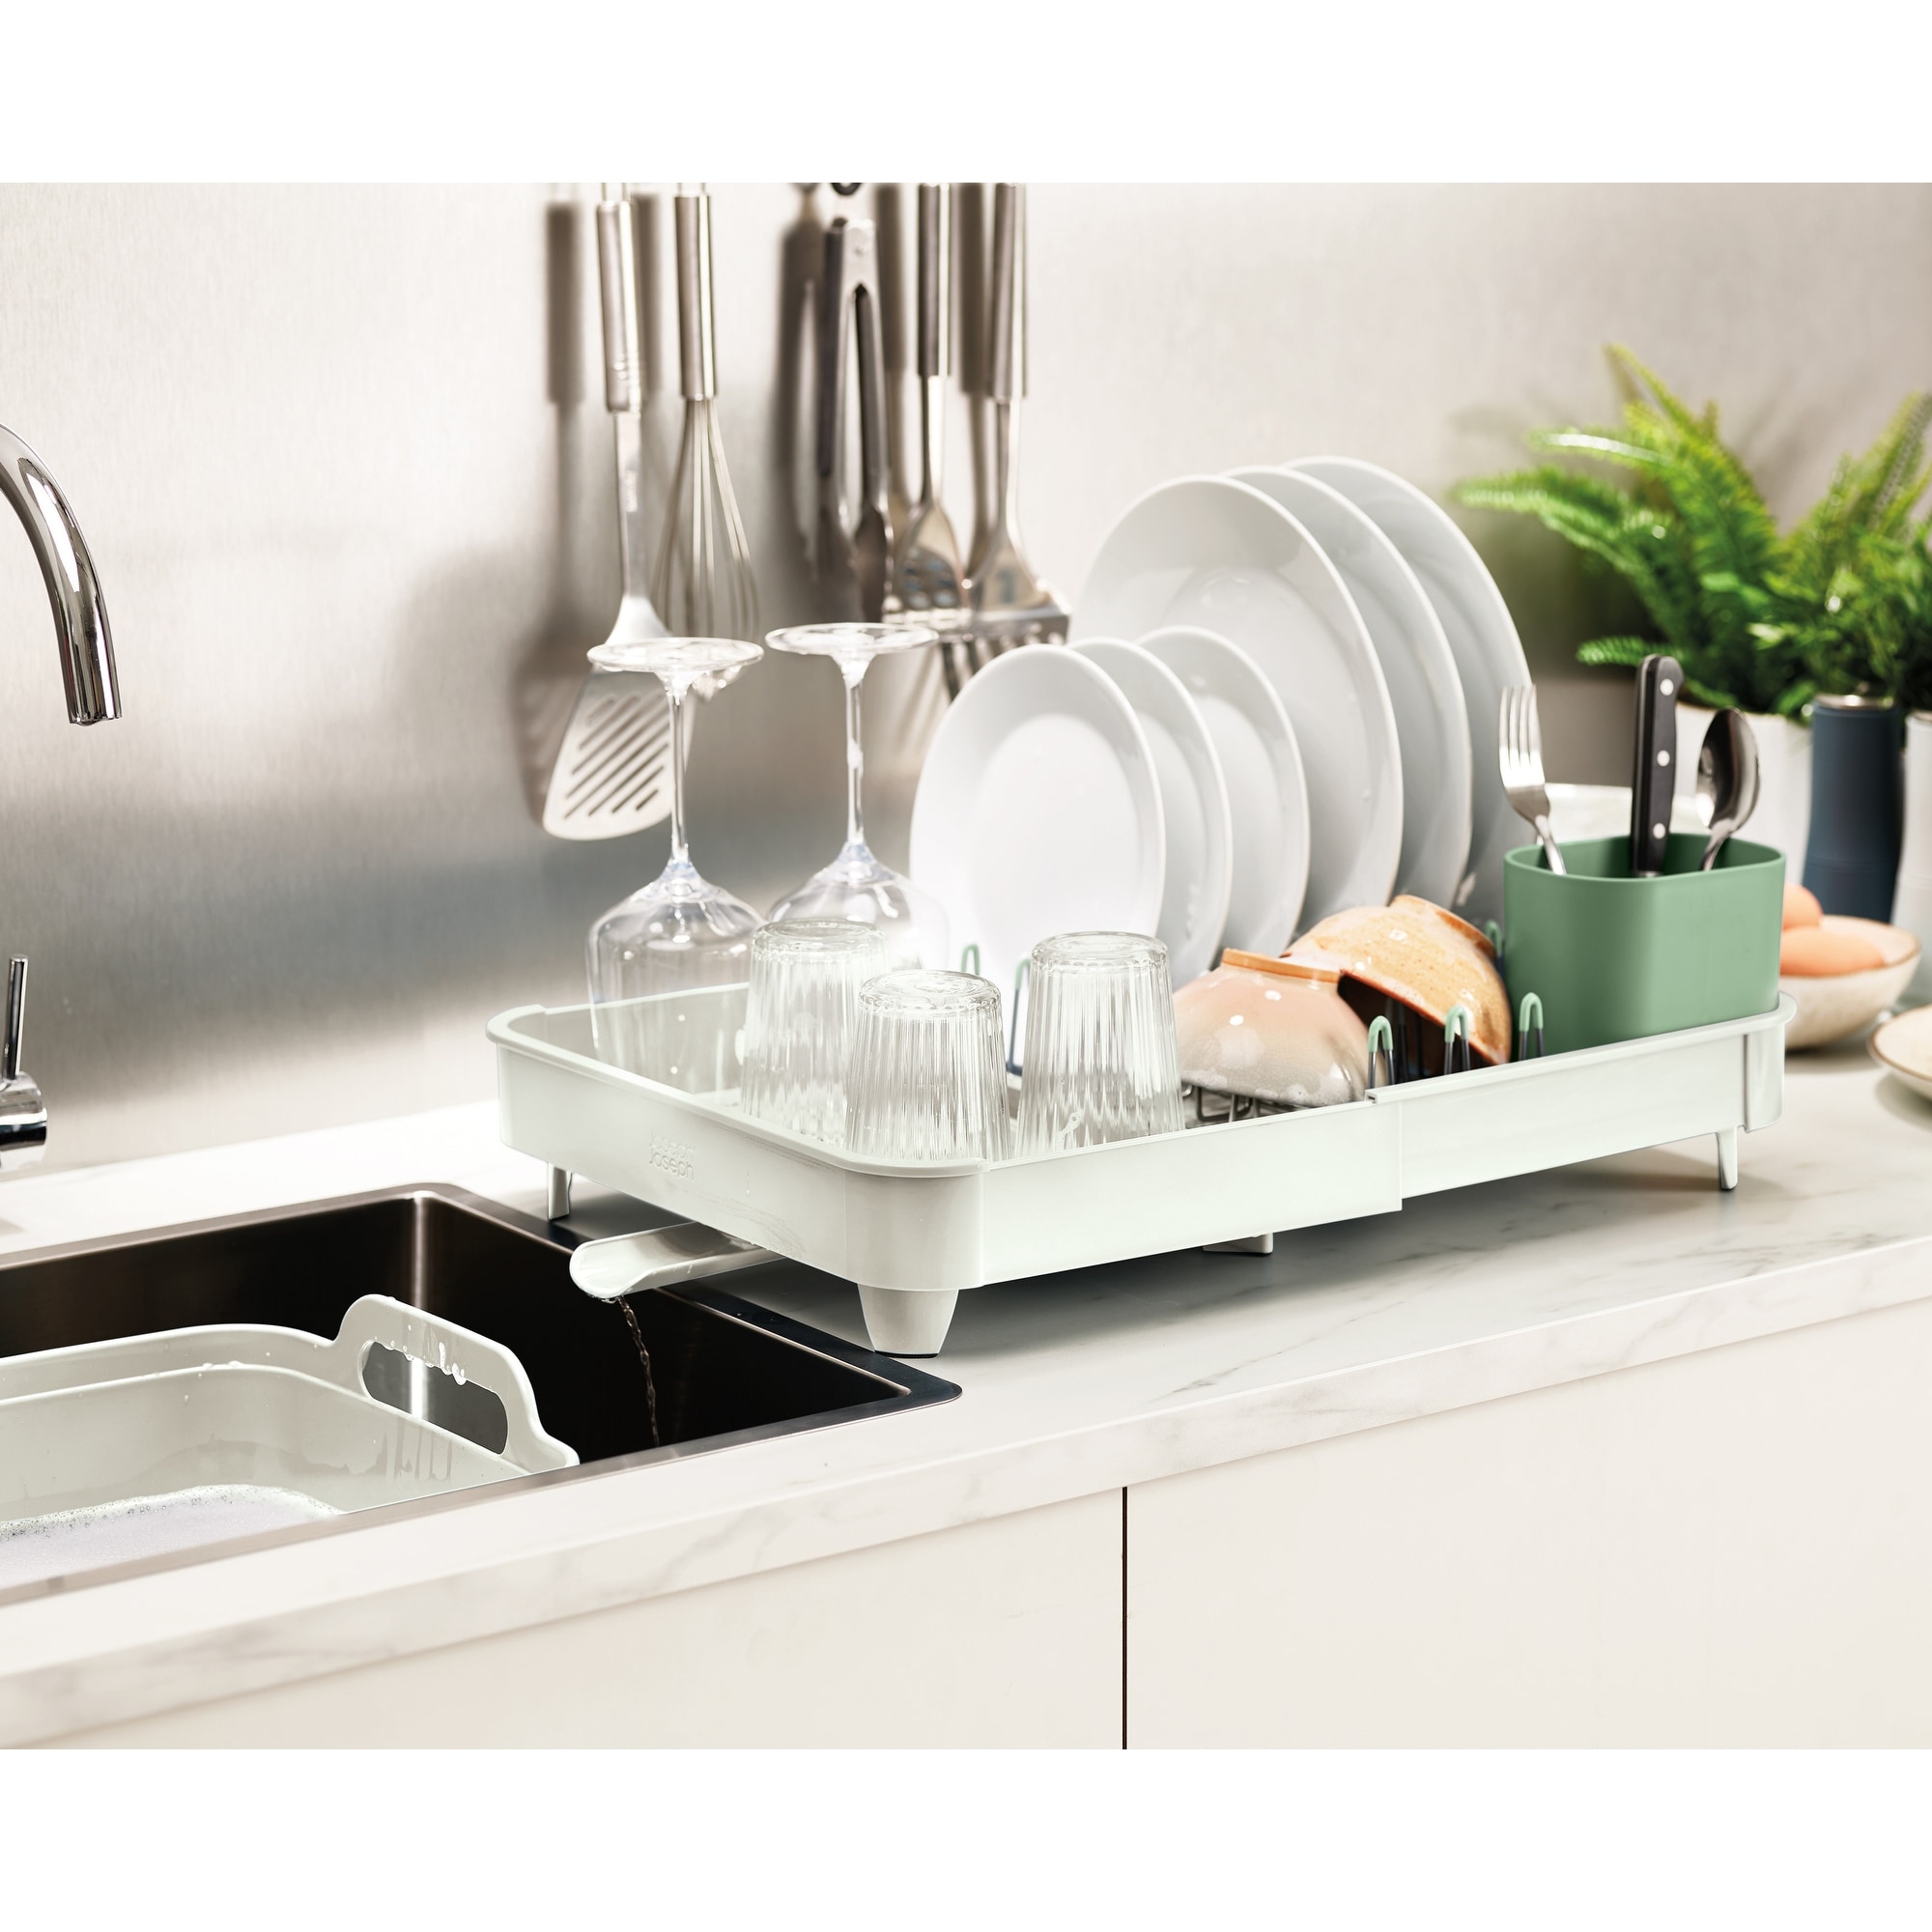 https://ak1.ostkcdn.com/images/products/is/images/direct/5063cb681bfe99e05d10fa9fd2555c1e887db614/Extend-Expandable-Dish-Rack.jpg